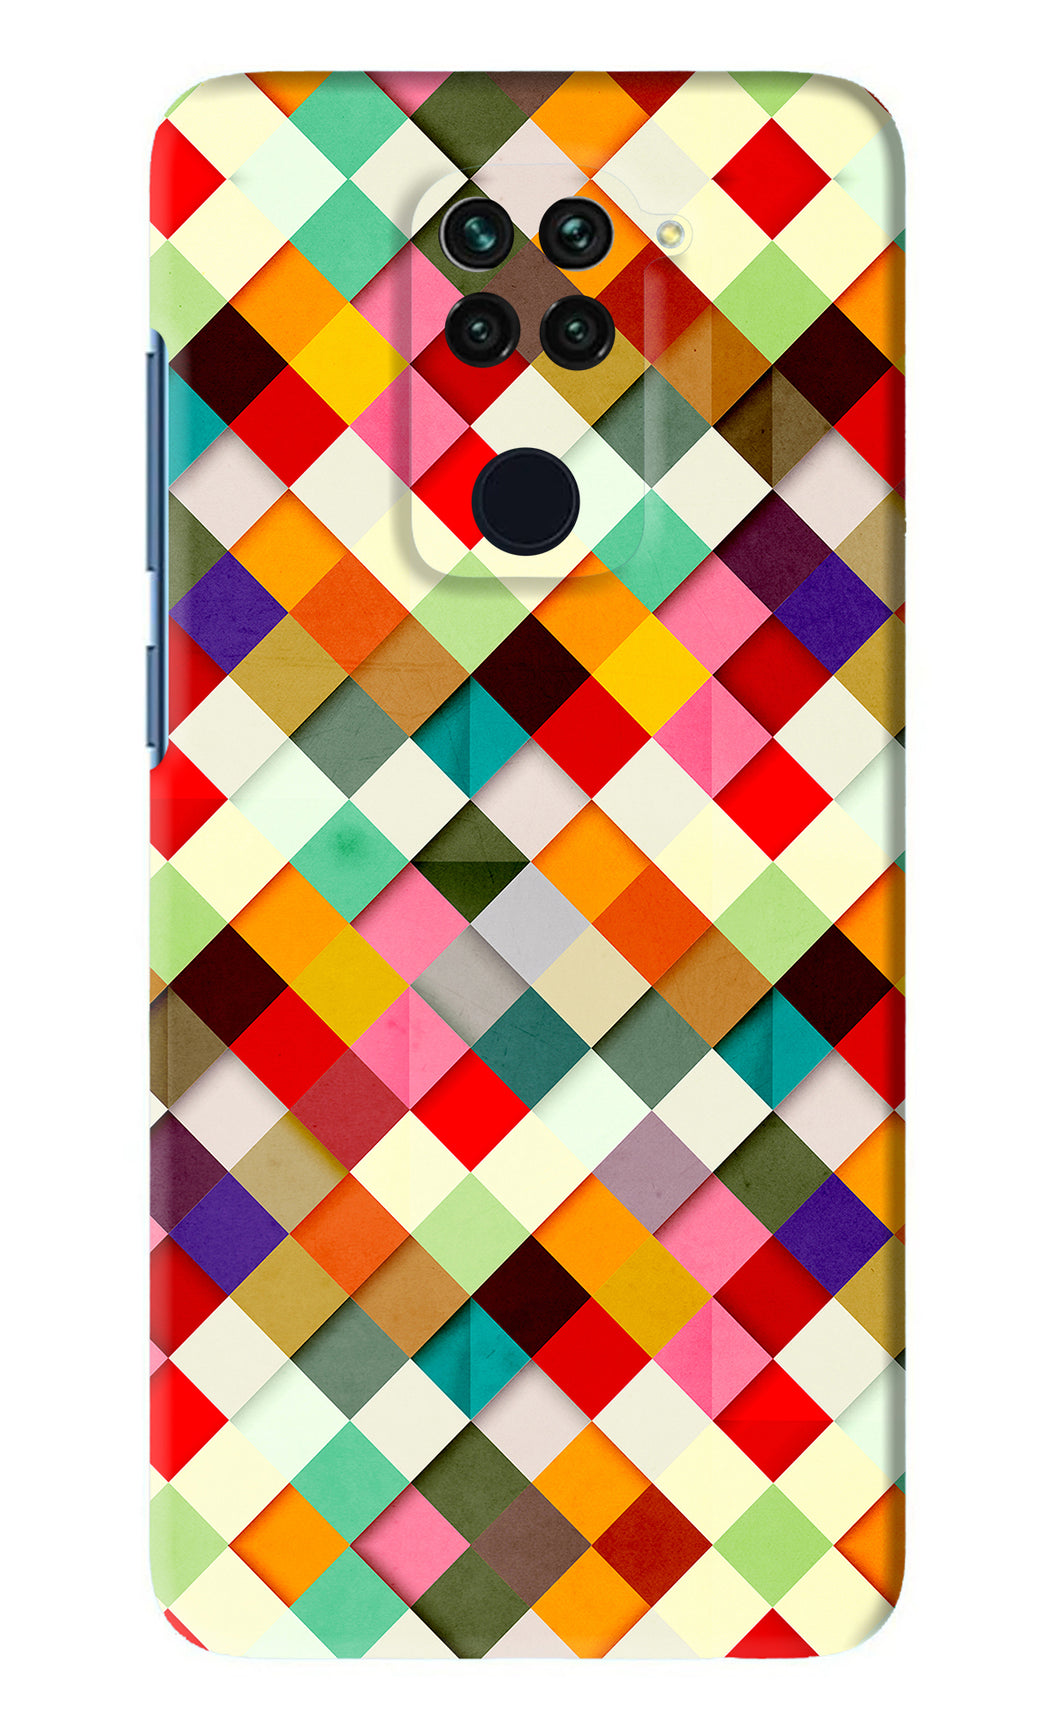 Geometric Abstract Colorful Xiaomi Redmi Note 9 Back Skin Wrap